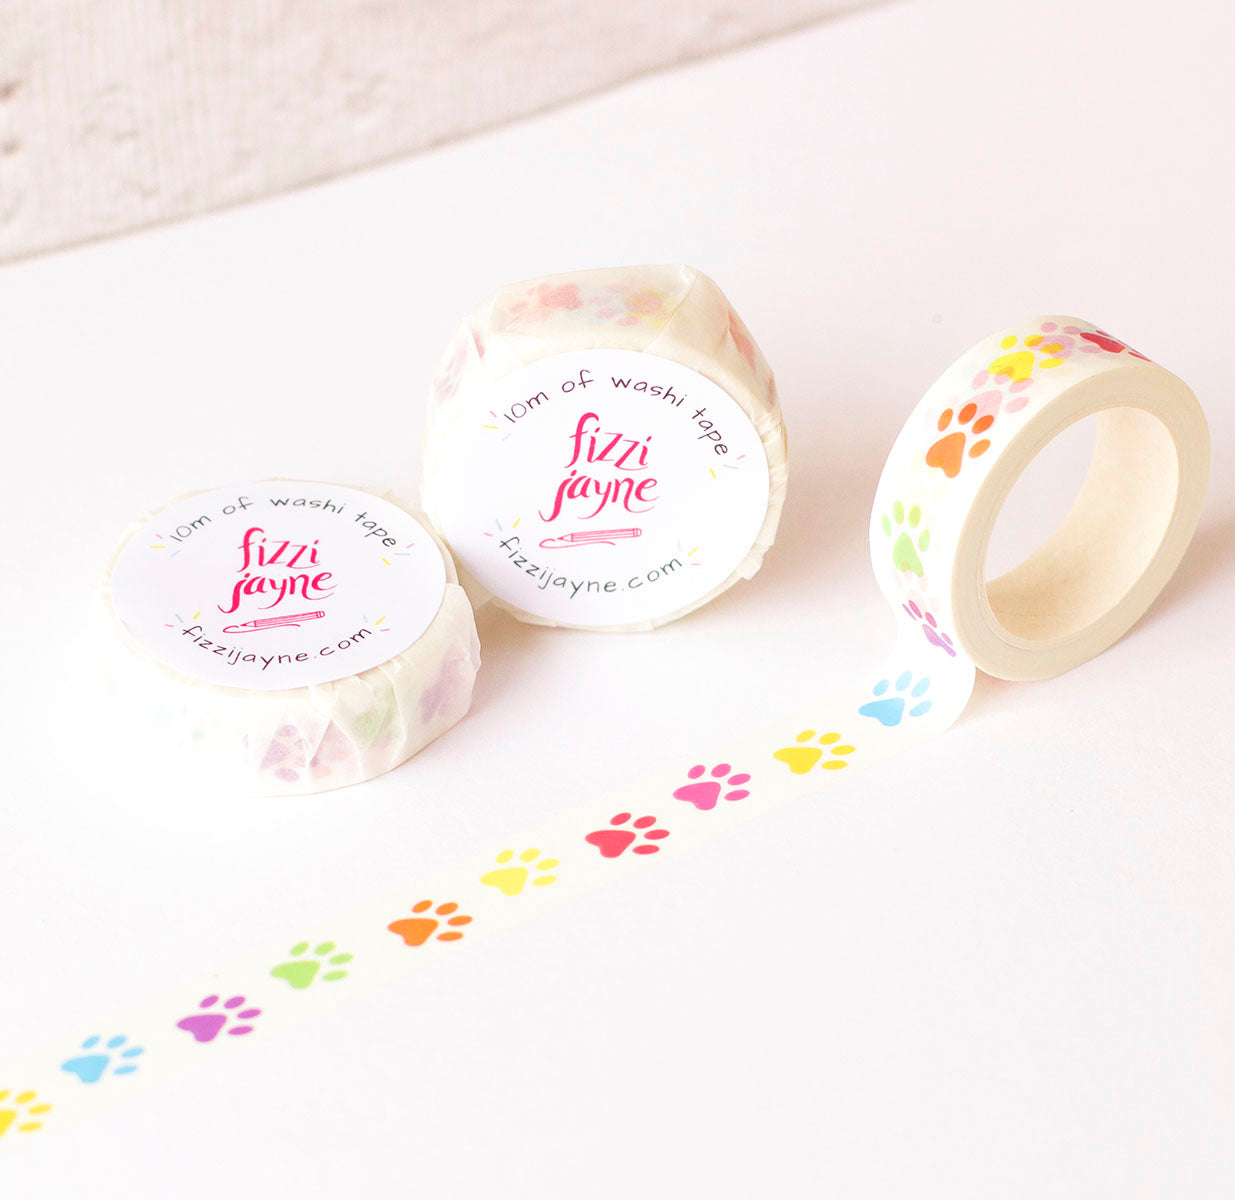 Environmentally packaging for the Rainbow paw print washi tape by fizzi jayne